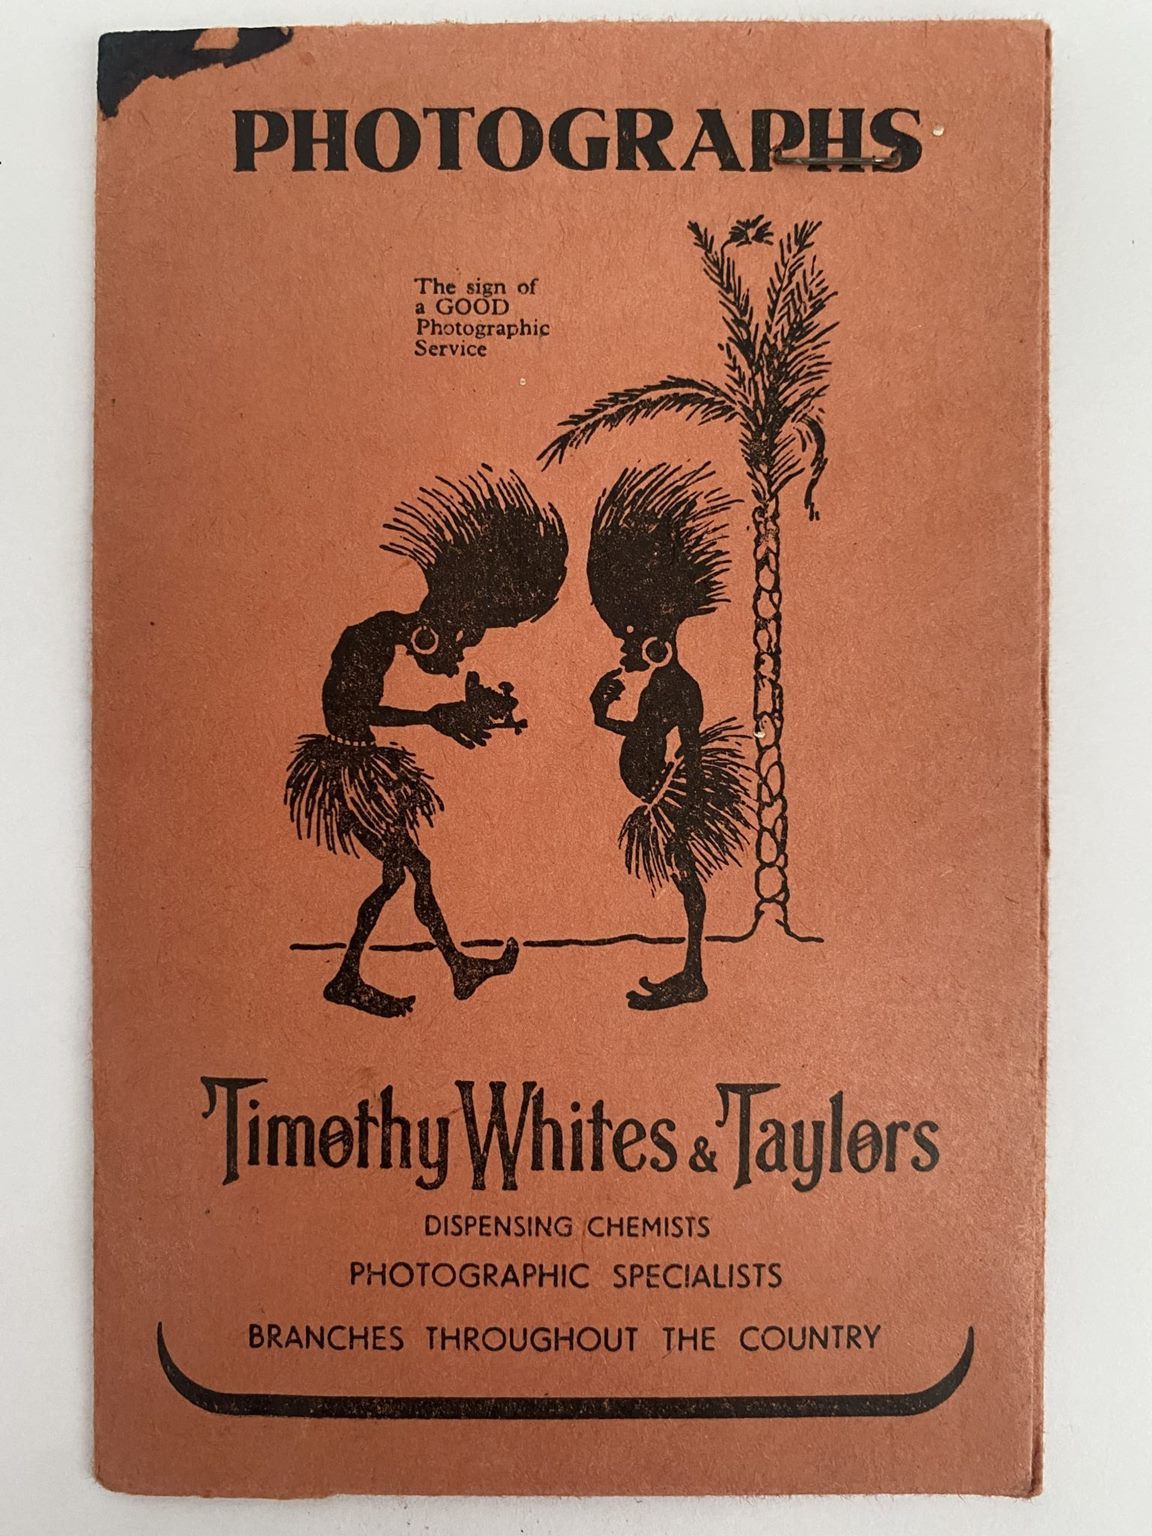 OLD PHOTO / NEGATIVE WALLET: Timothy Whites & Taylors, Chemists 1920s / 1930s